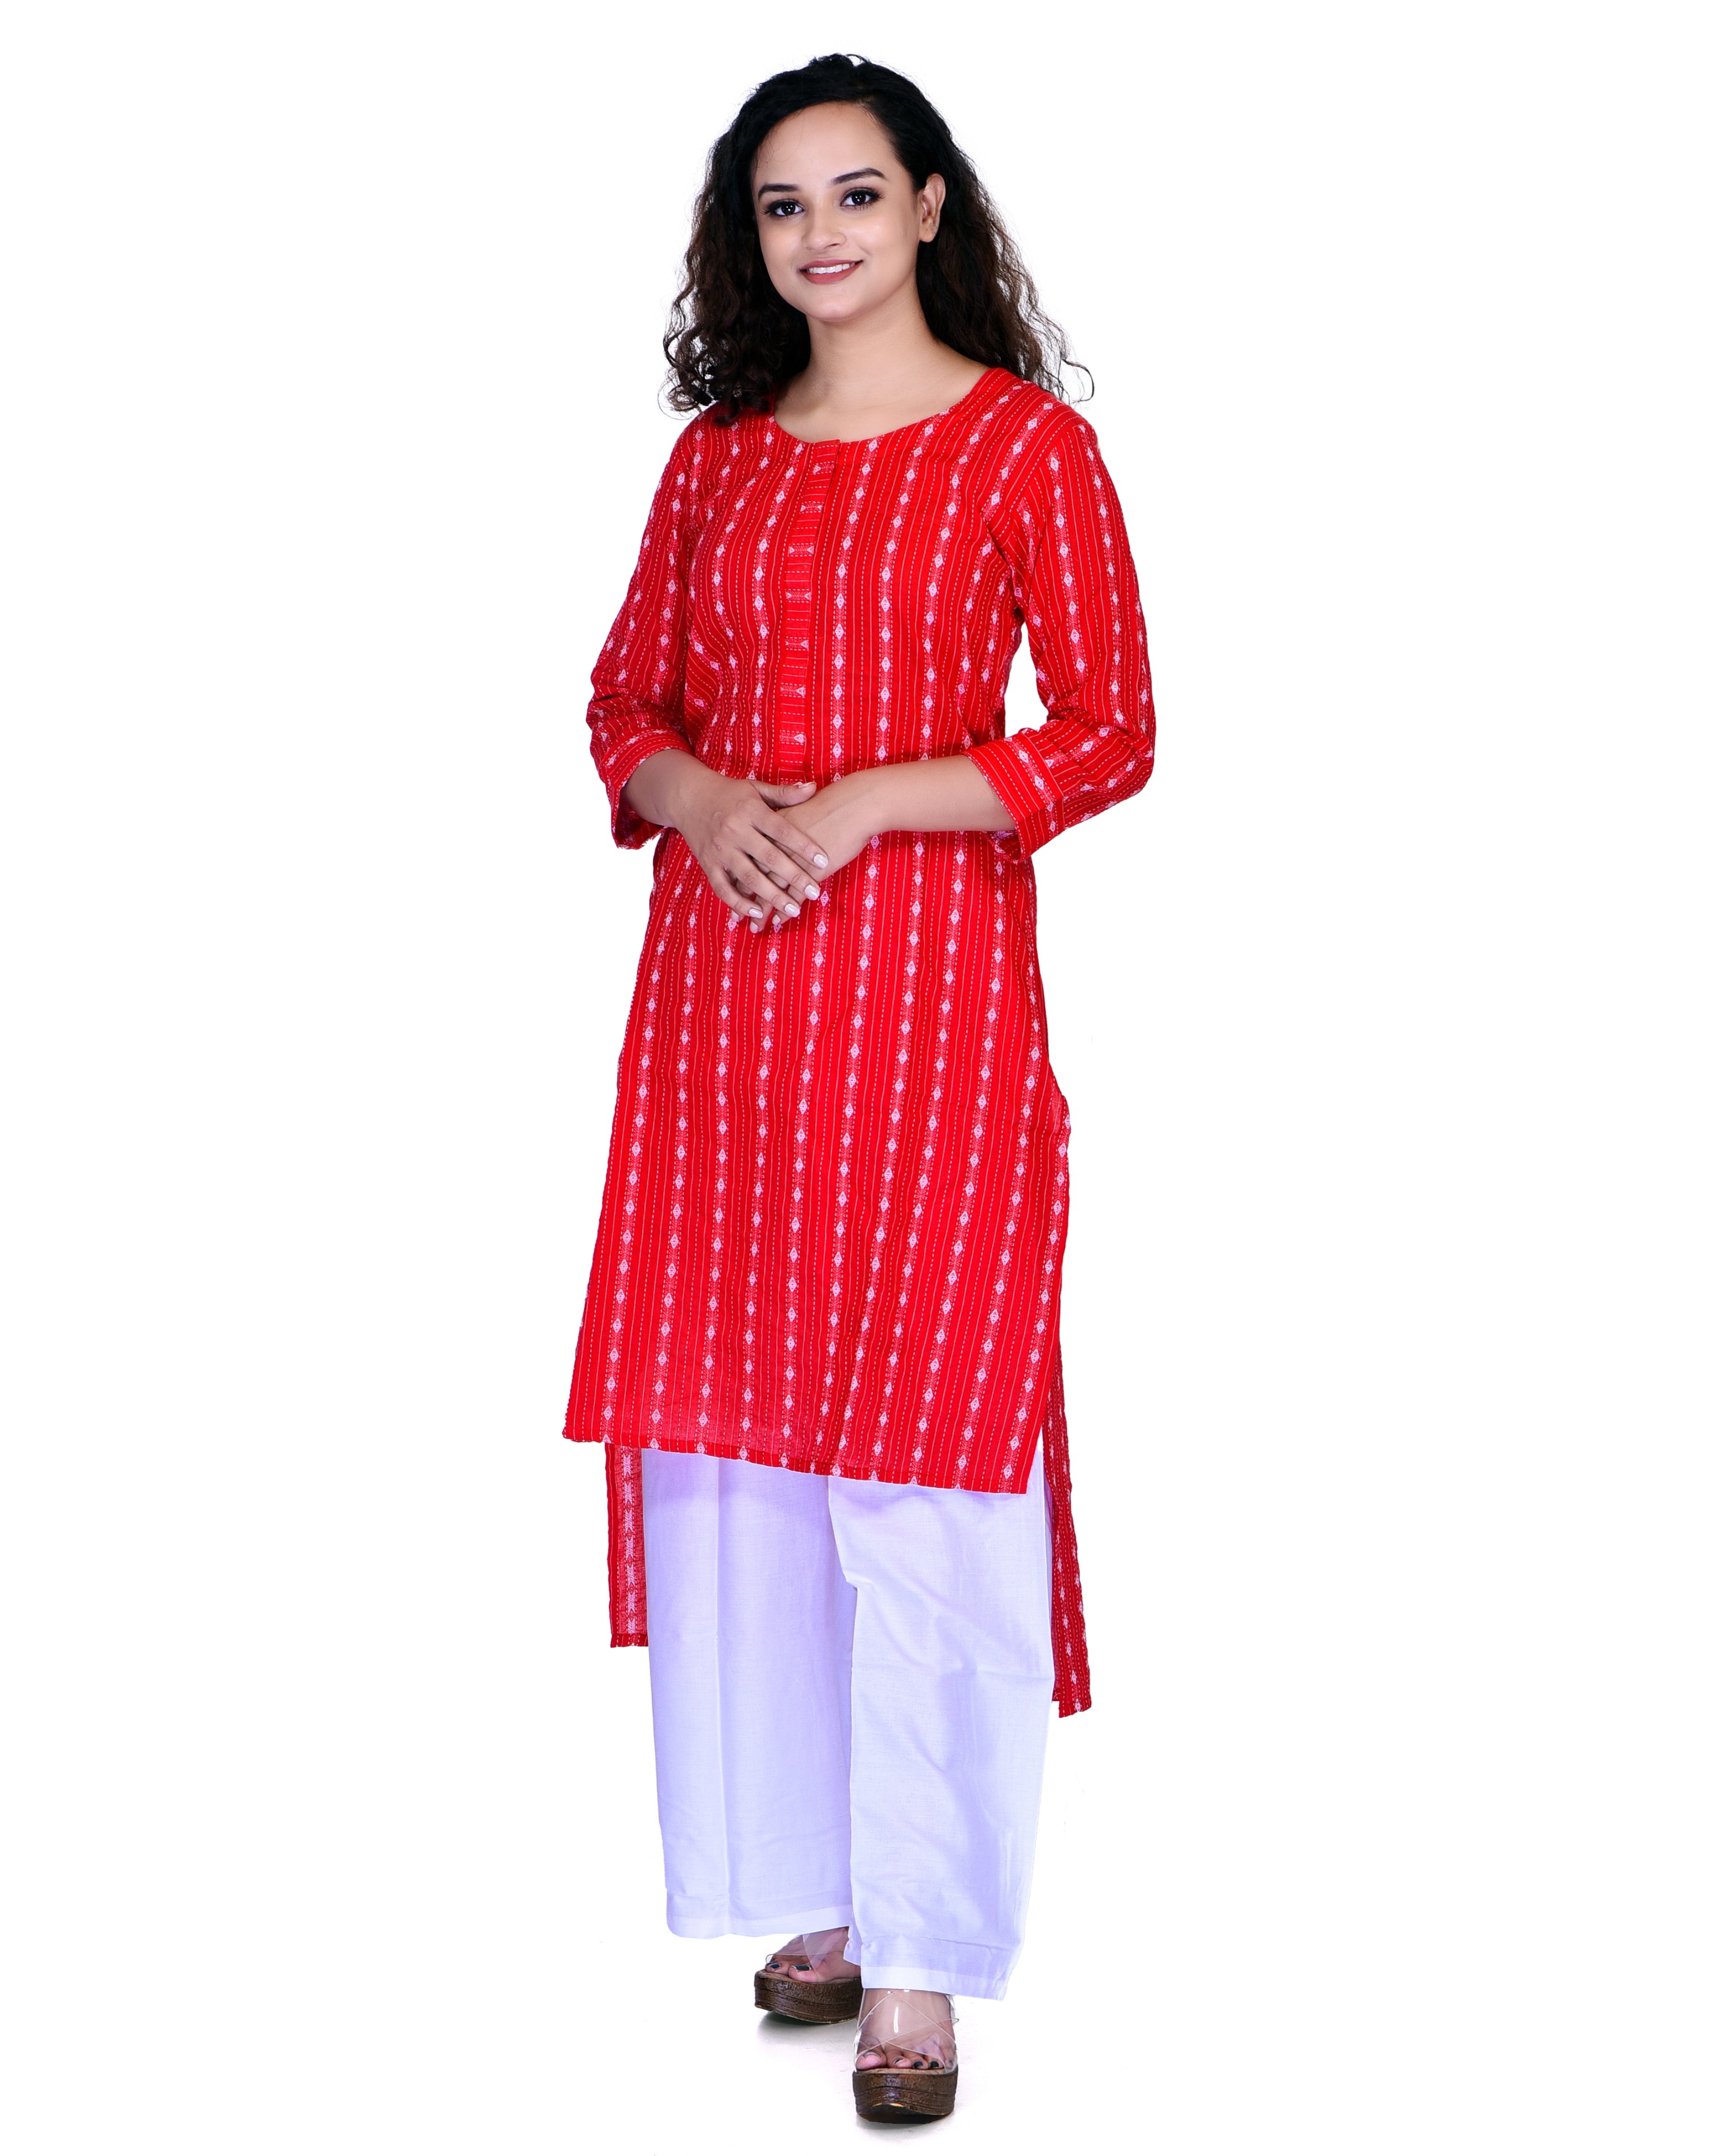 Buy Clothy N Wave Women's Red Embroidered High-Low Kurti (Kurti06Red-3XL)  at Amazon.in